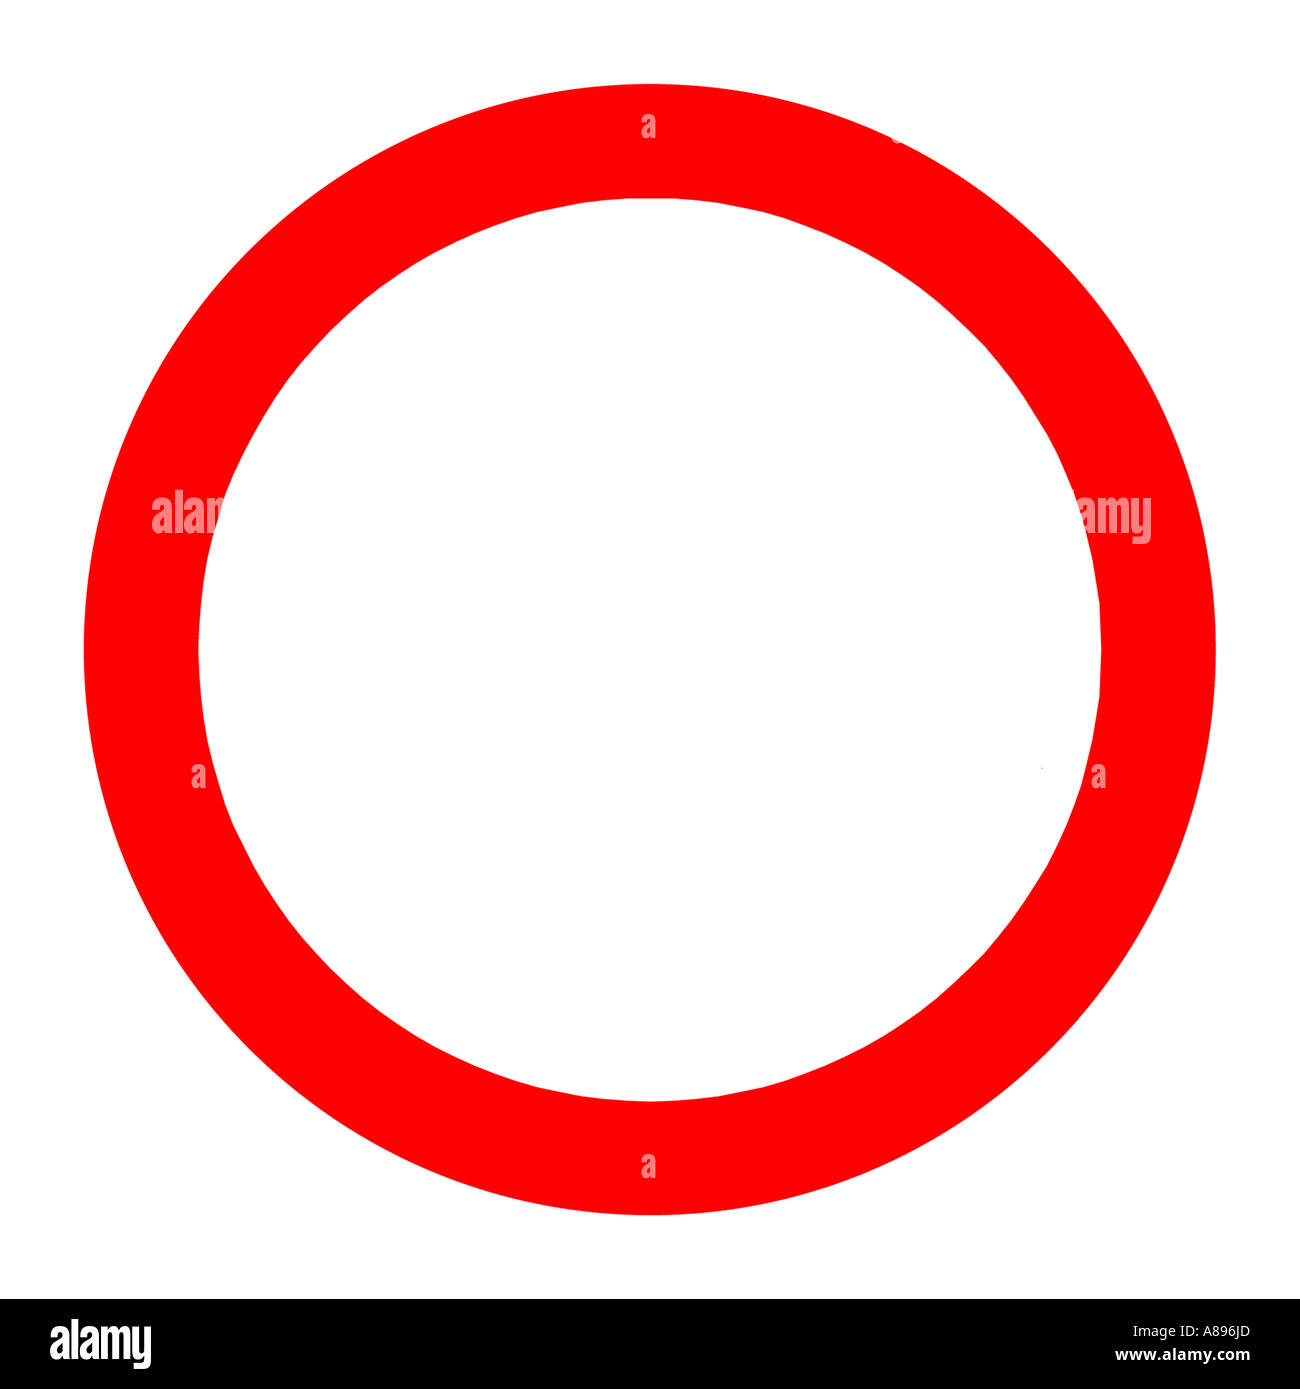 Red Circle Road sign on white background Stock Photo - Alamy